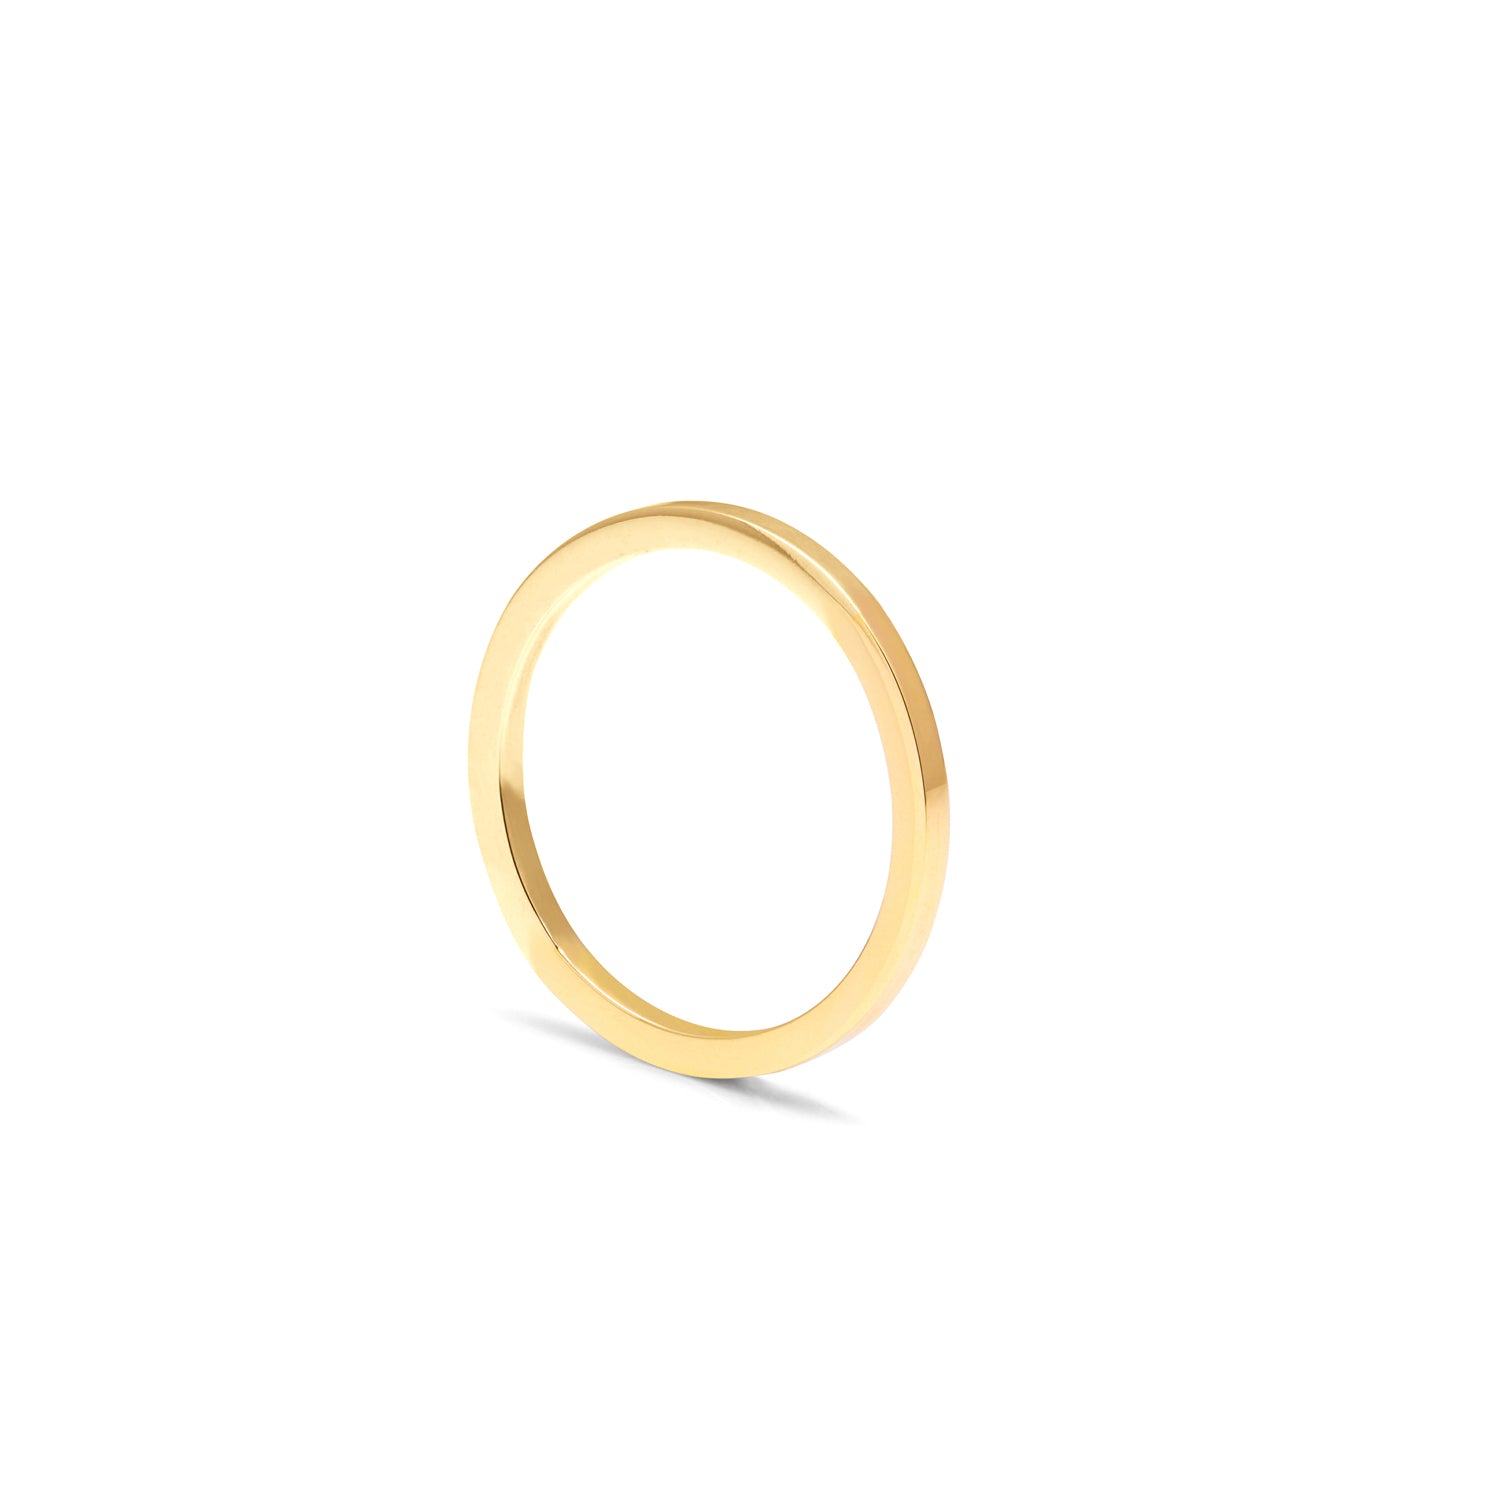 Square 1.5 Ring - 9k Yellow Gold